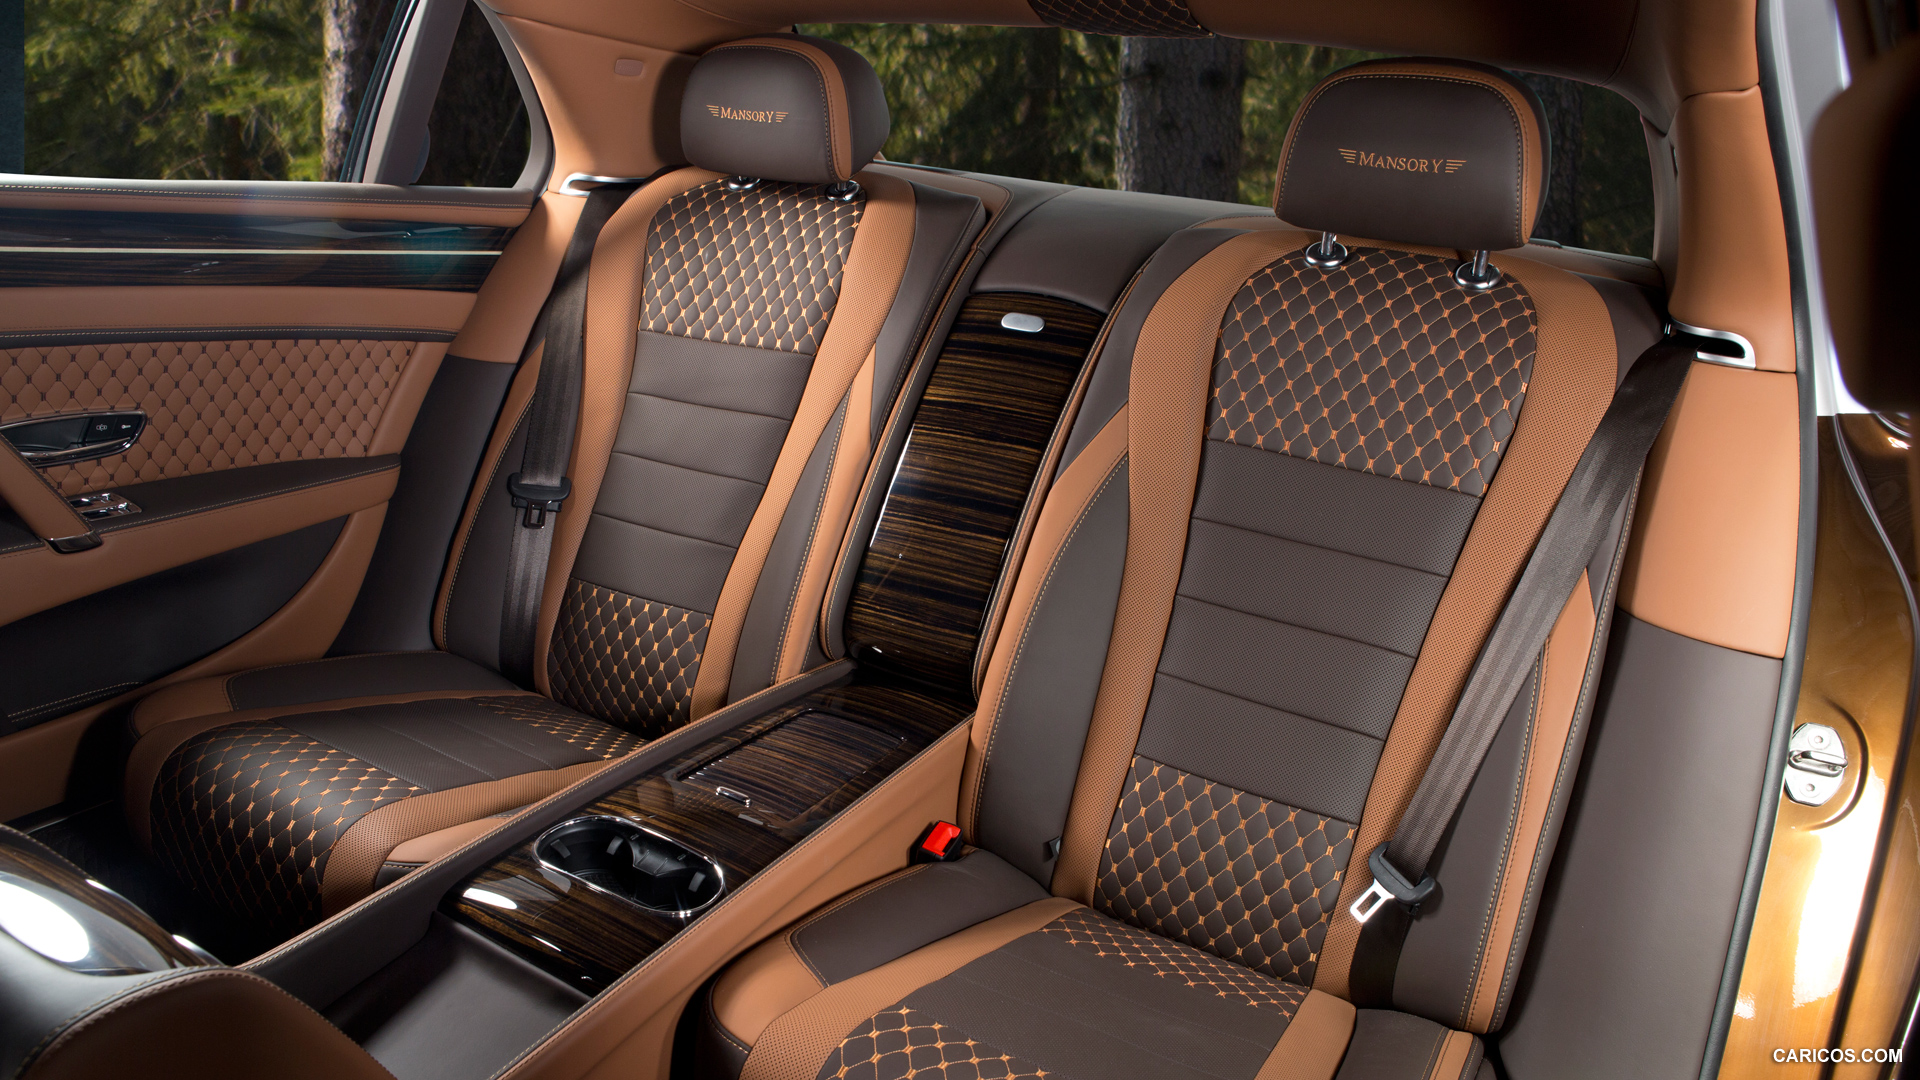 2014 Mansory Bentley Flying Spur  - Interior Rear Seats, #8 of 8